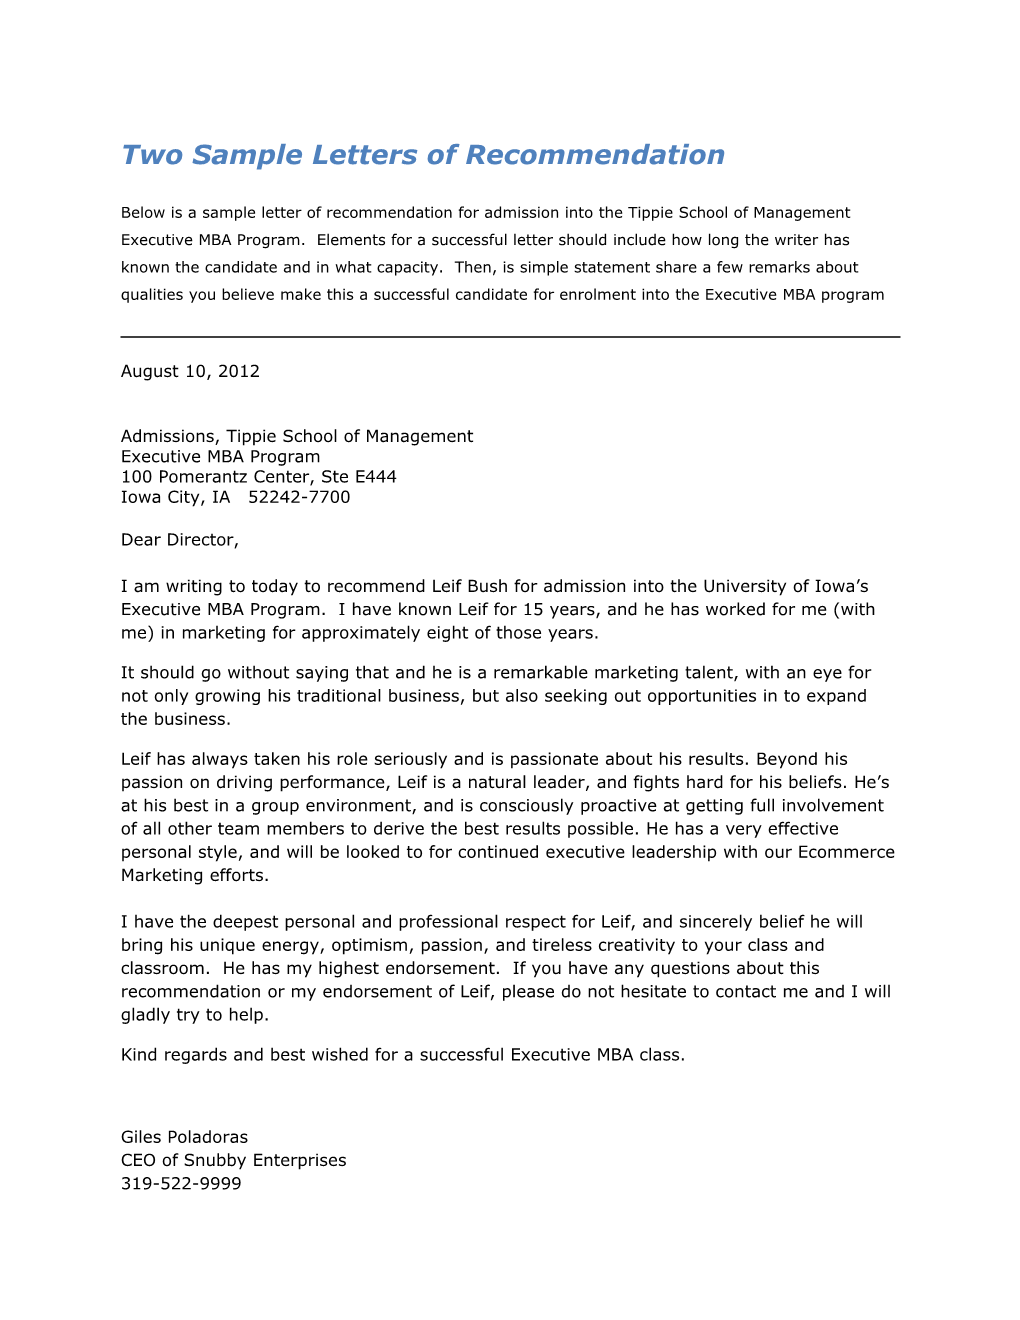 Two Sample Letters of Recommendation